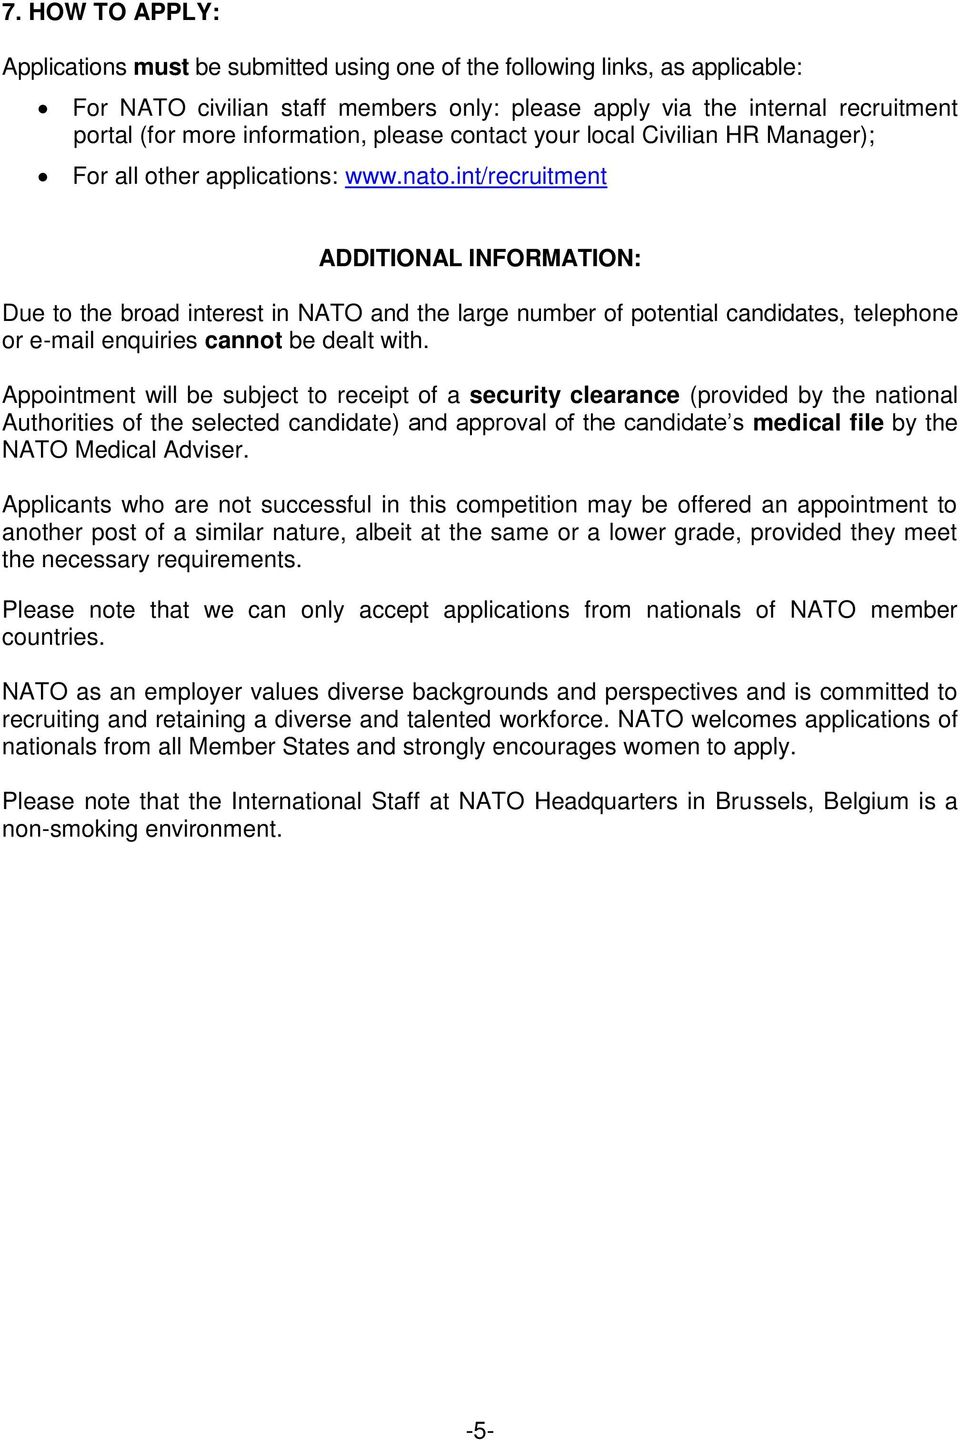 int/recruitment ADDITIONAL INFORMATION: Due to the broad interest in NATO and the large number of potential candidates, telephone or e-mail enquiries cannot be dealt with.